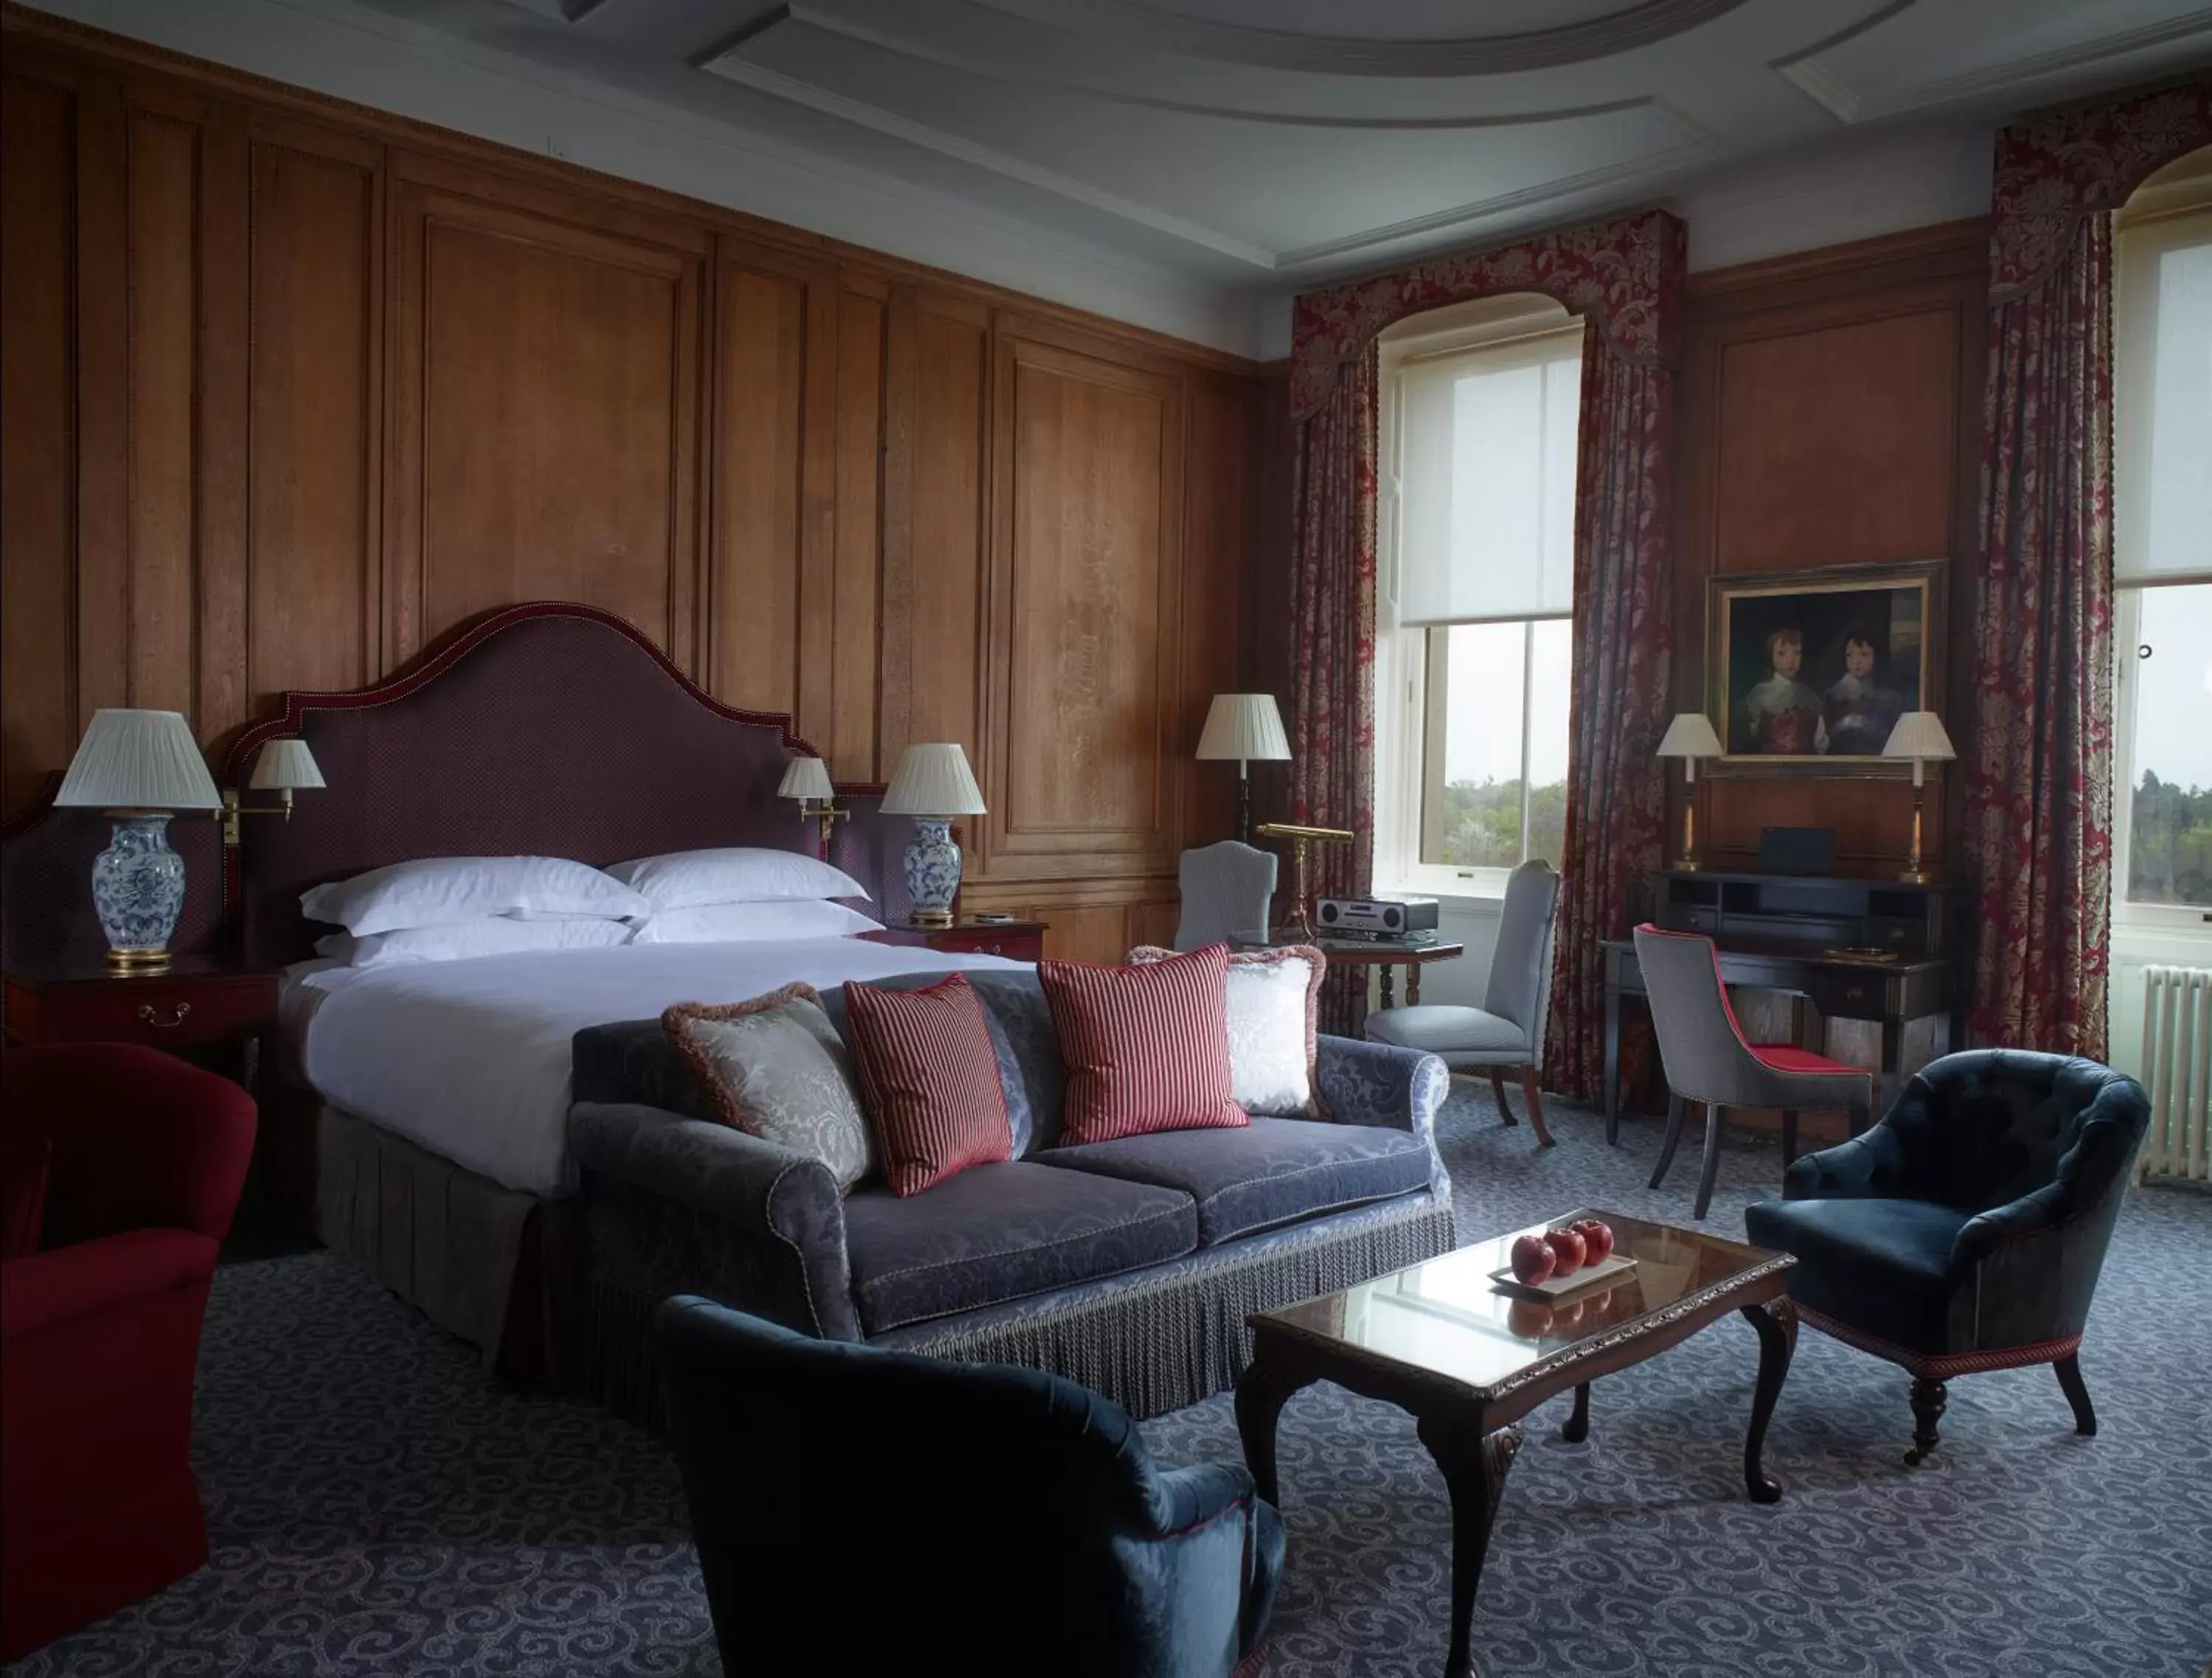 Bedroom in Cliveden House - an Iconic Luxury Hotel